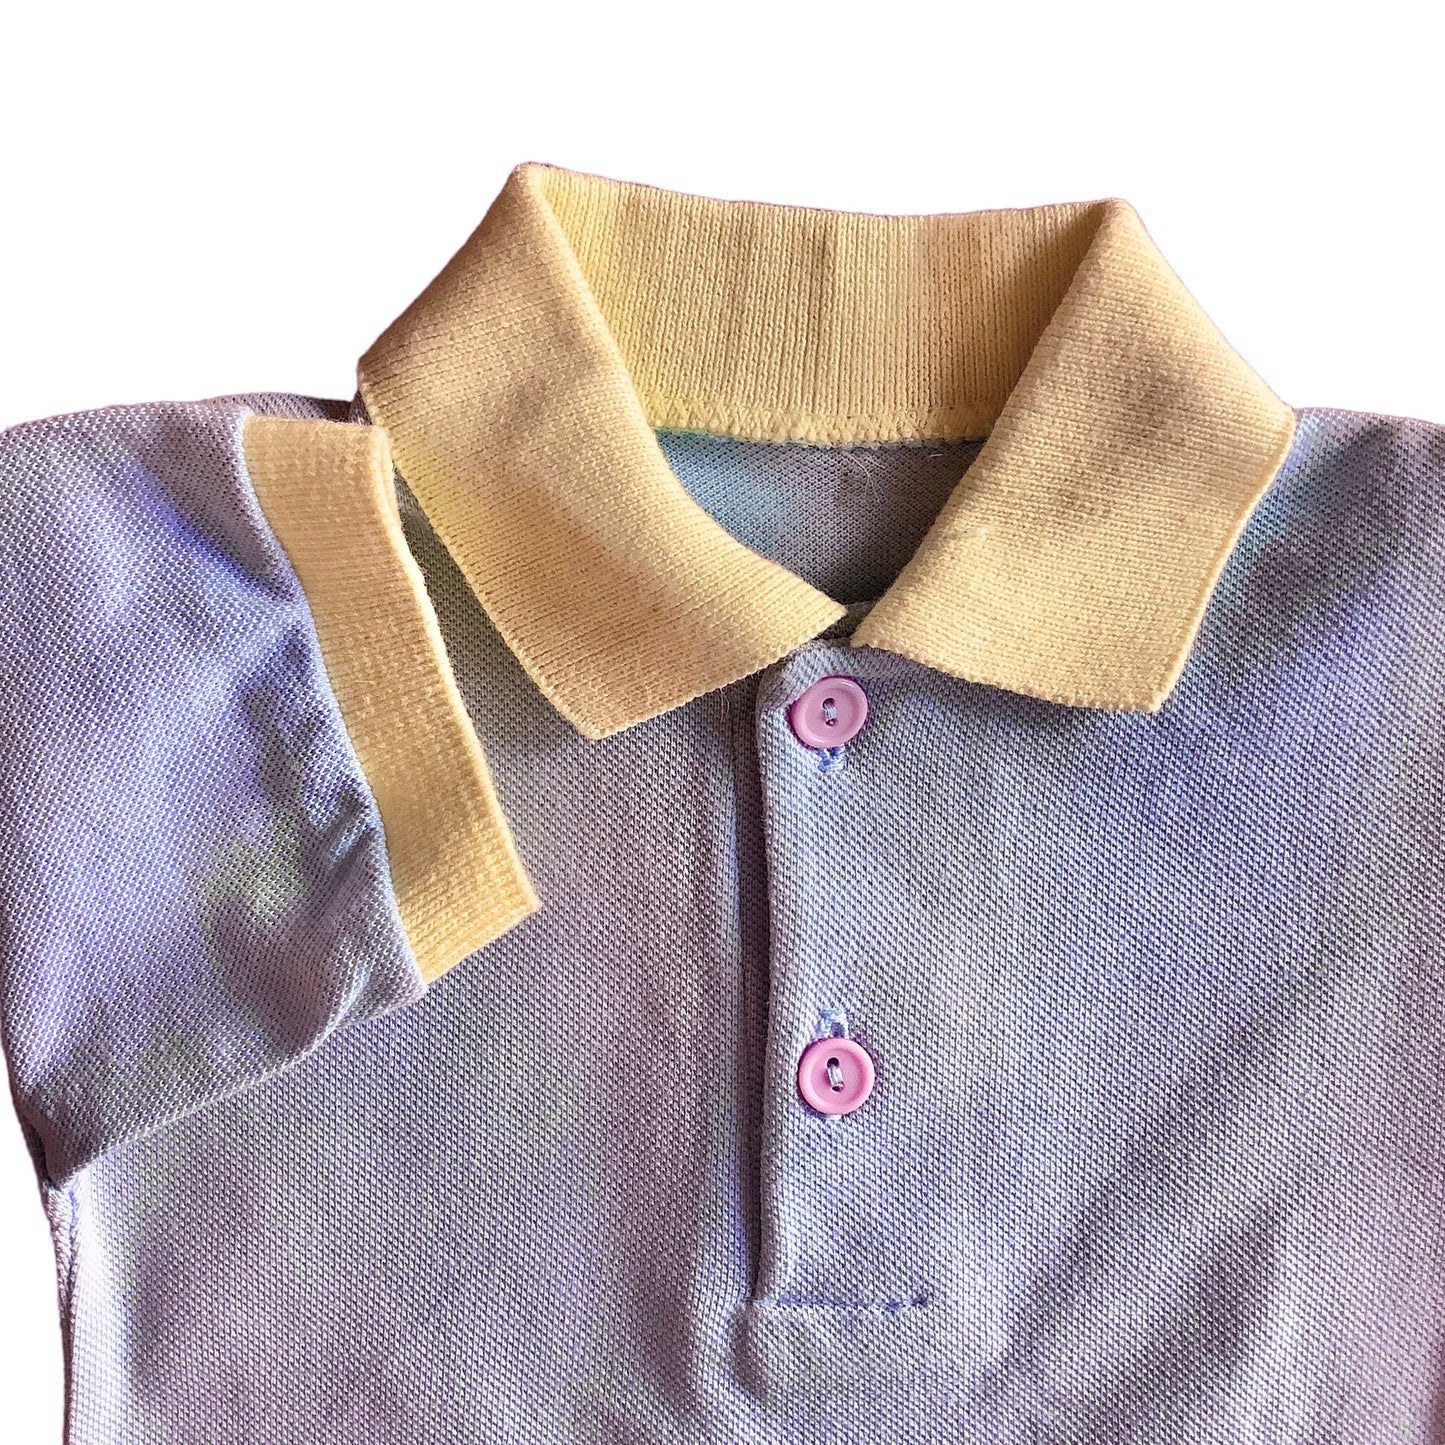 Vintage 70's Baby Polo Top / 3-6 Months